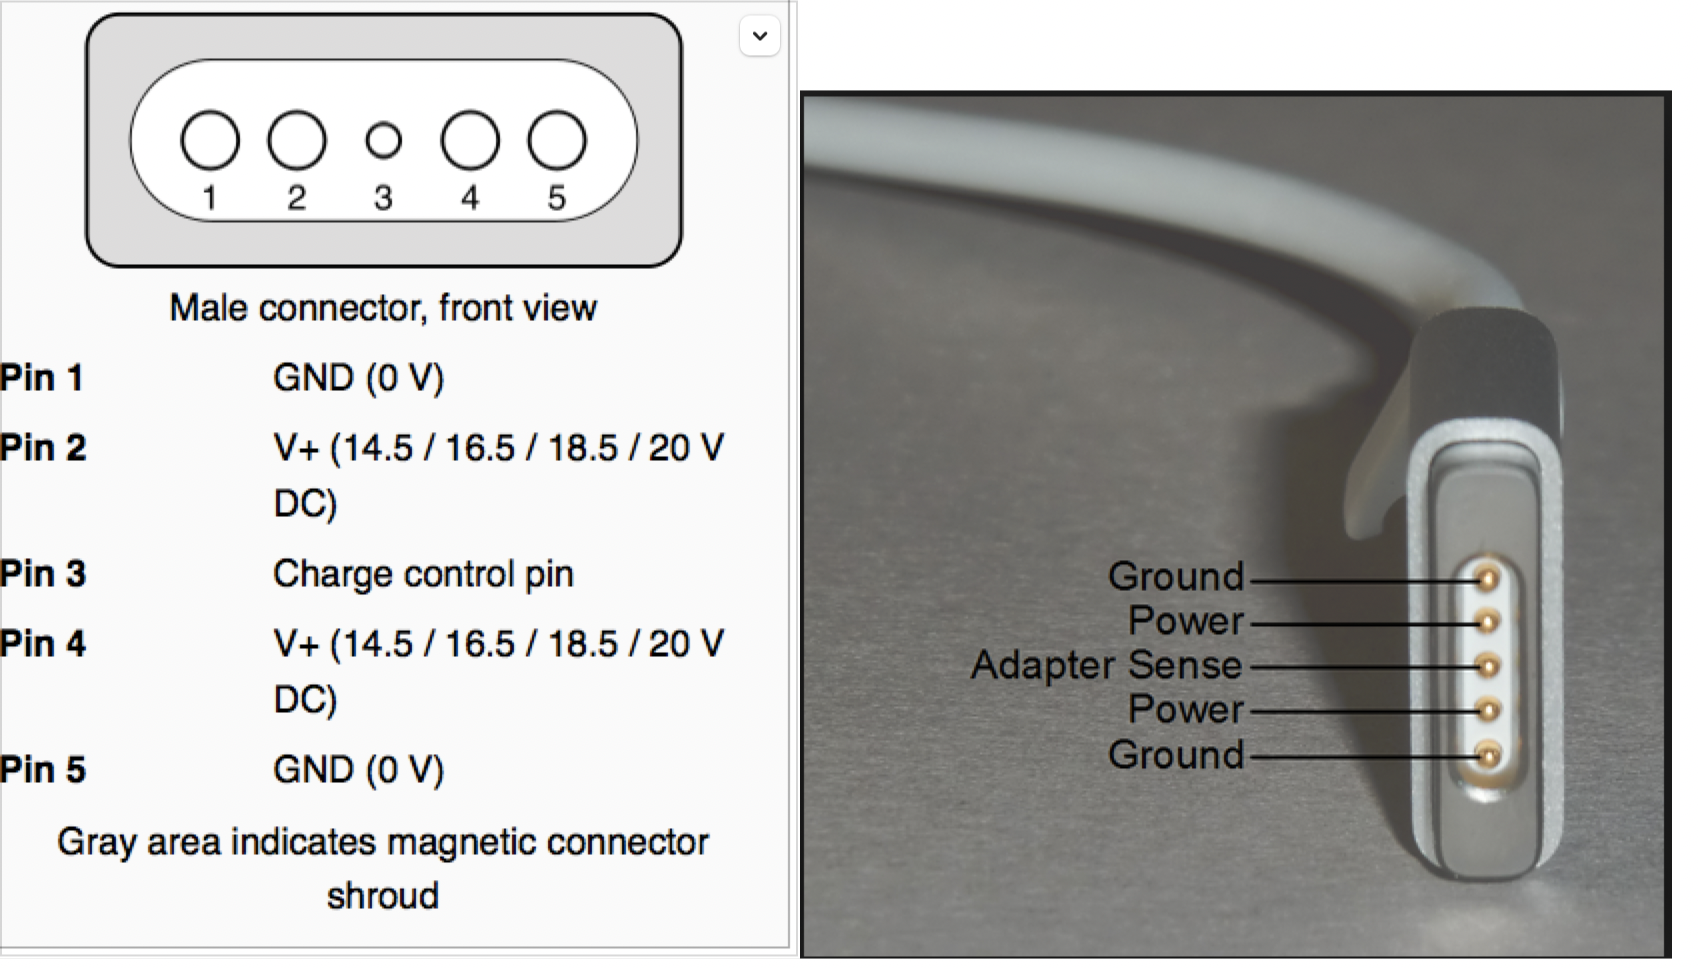 MBP 15” Magsafe 2 connector overheating - Apple Community